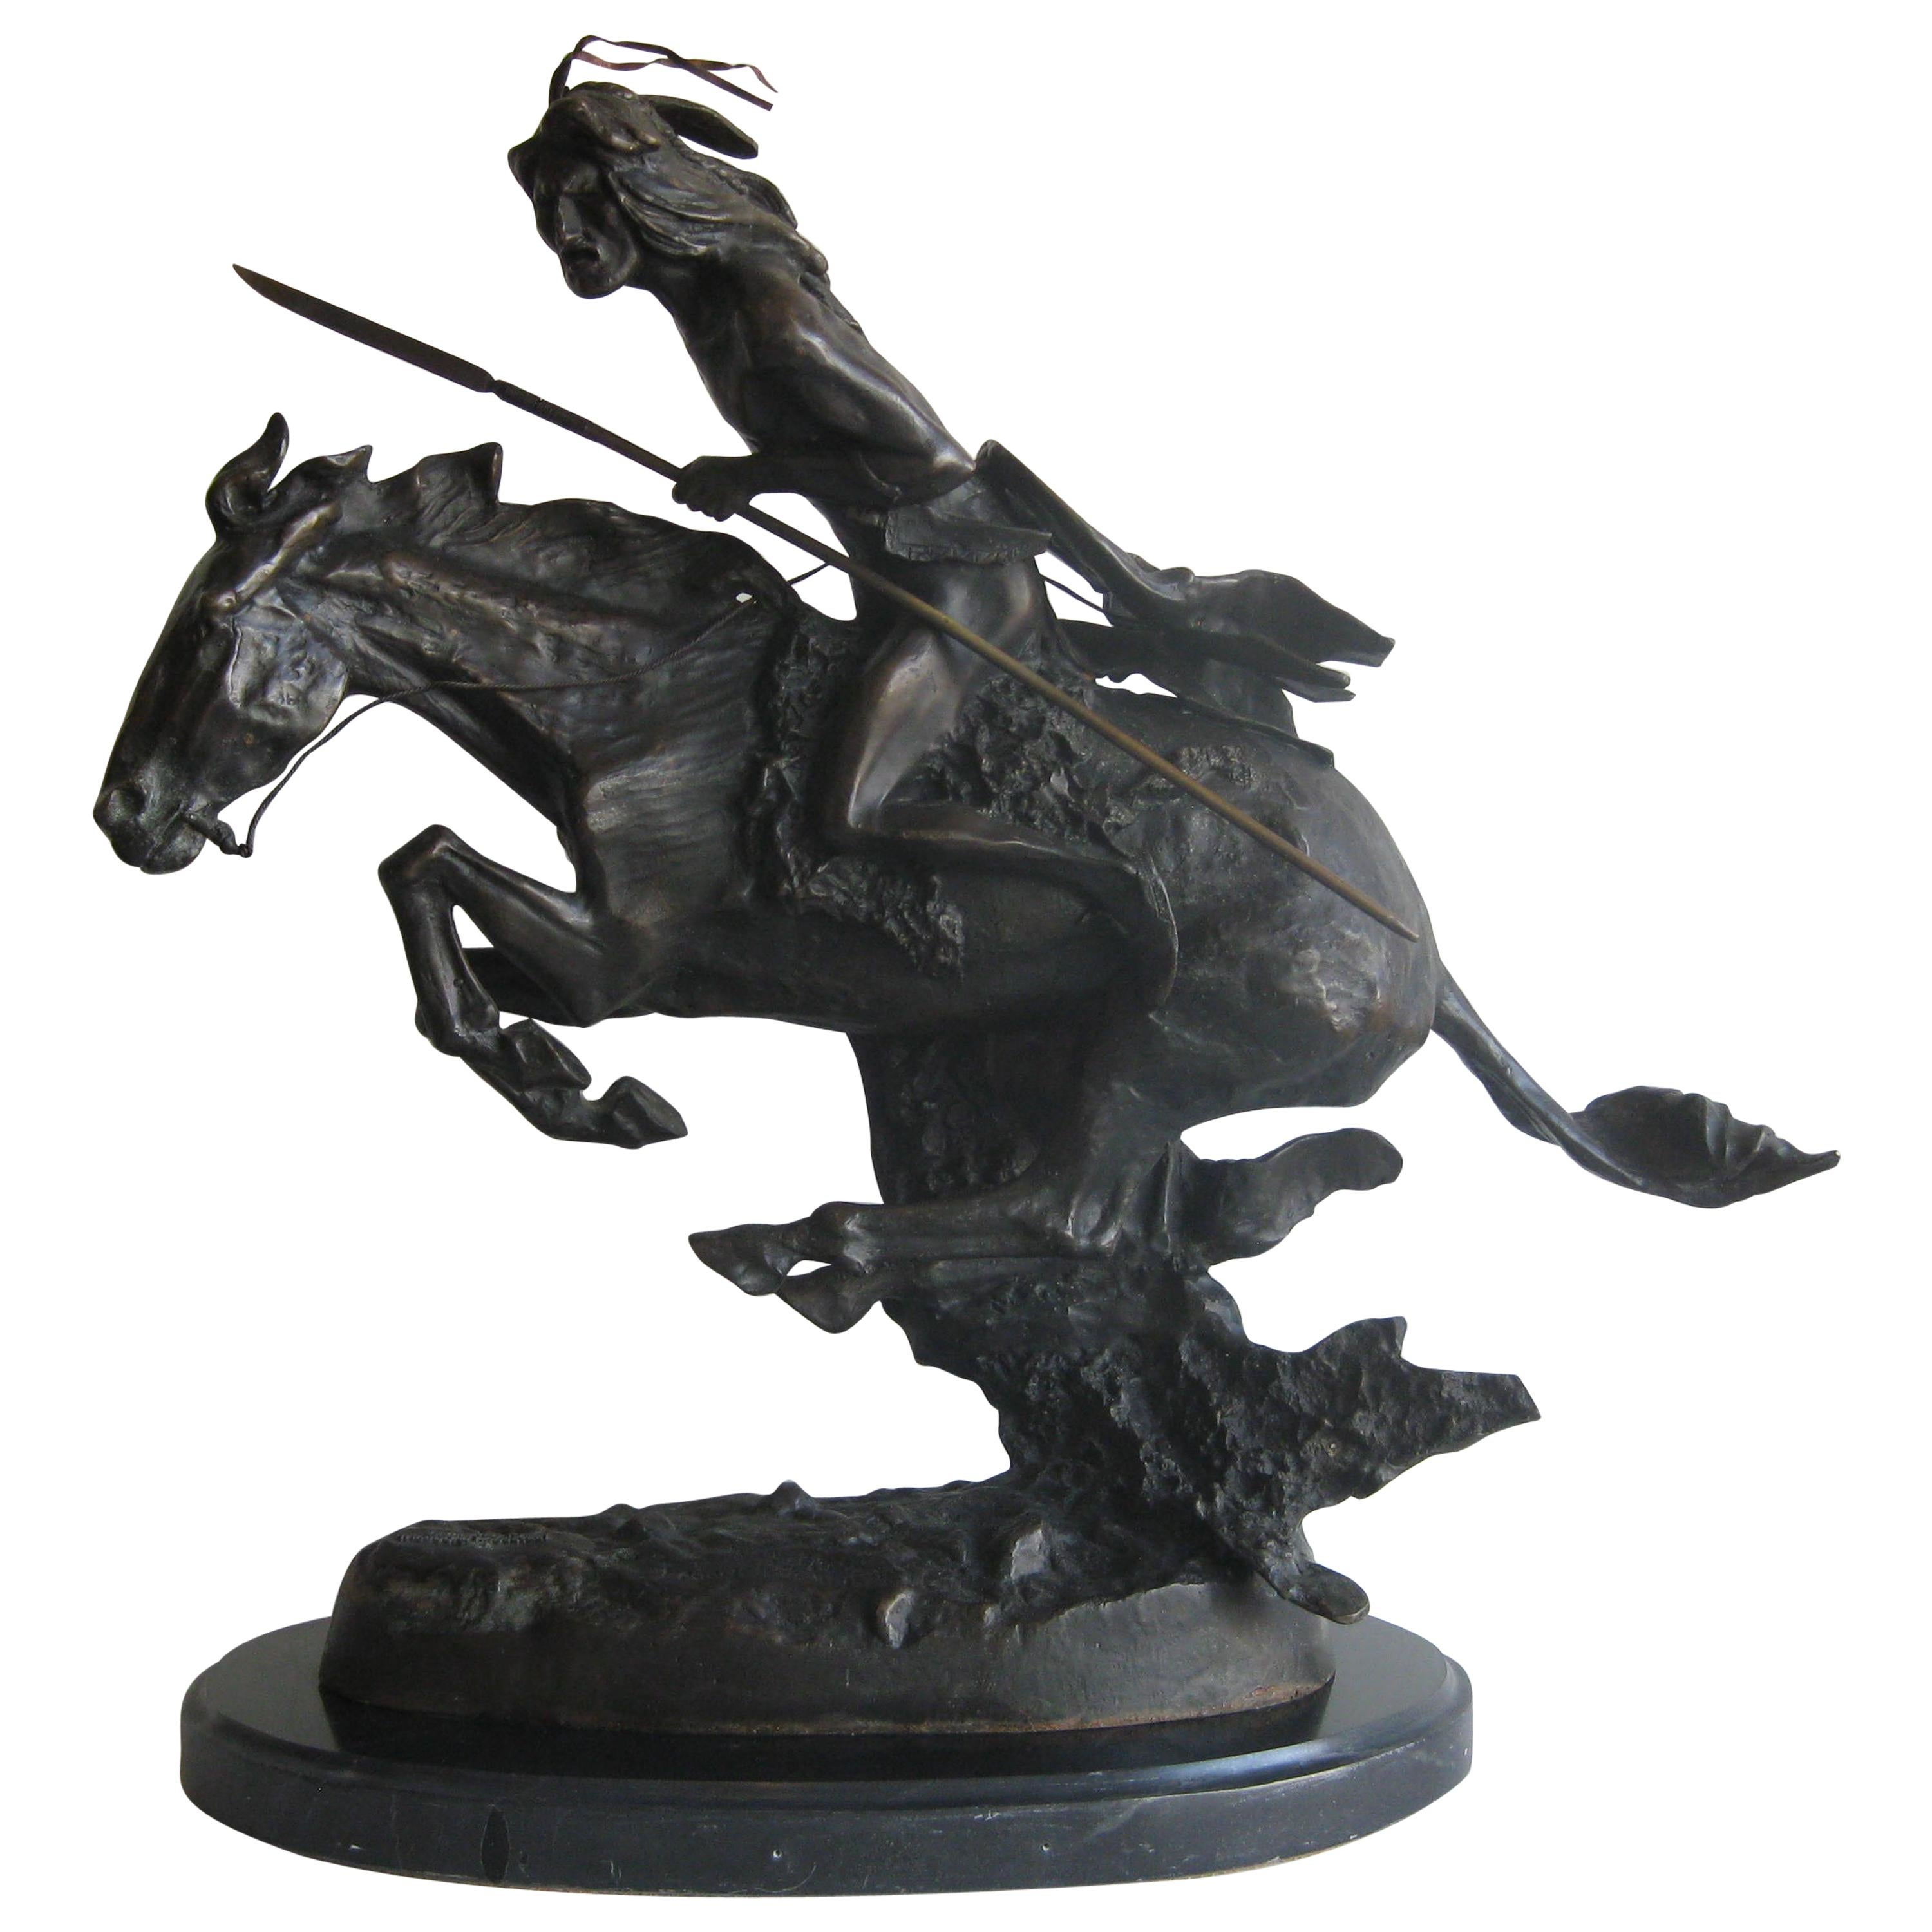 Frederic Remington "The Cheyenne" Bronze Sculpture Limited Edition #51/100